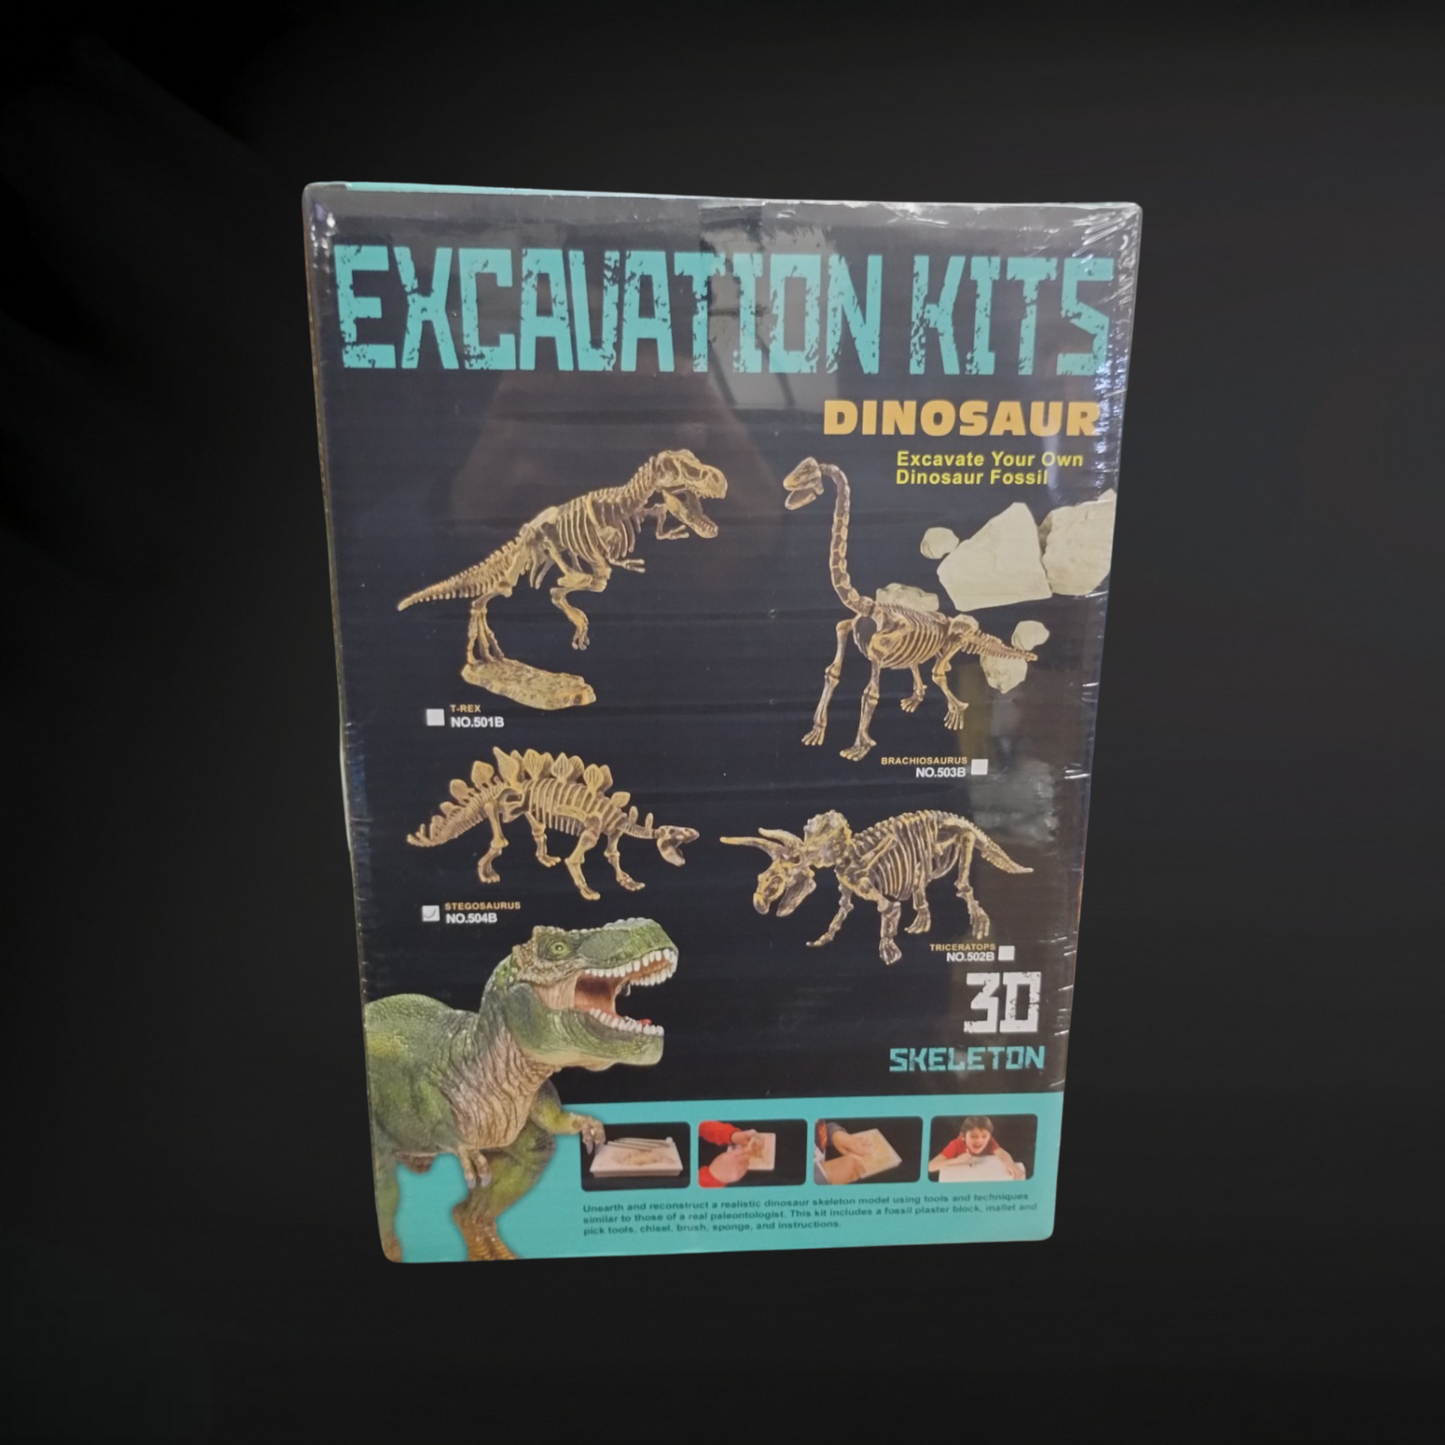 3D Dinosaur Skeleton Excavation Kit Toy | Unearth the Past and Have Fun Learning